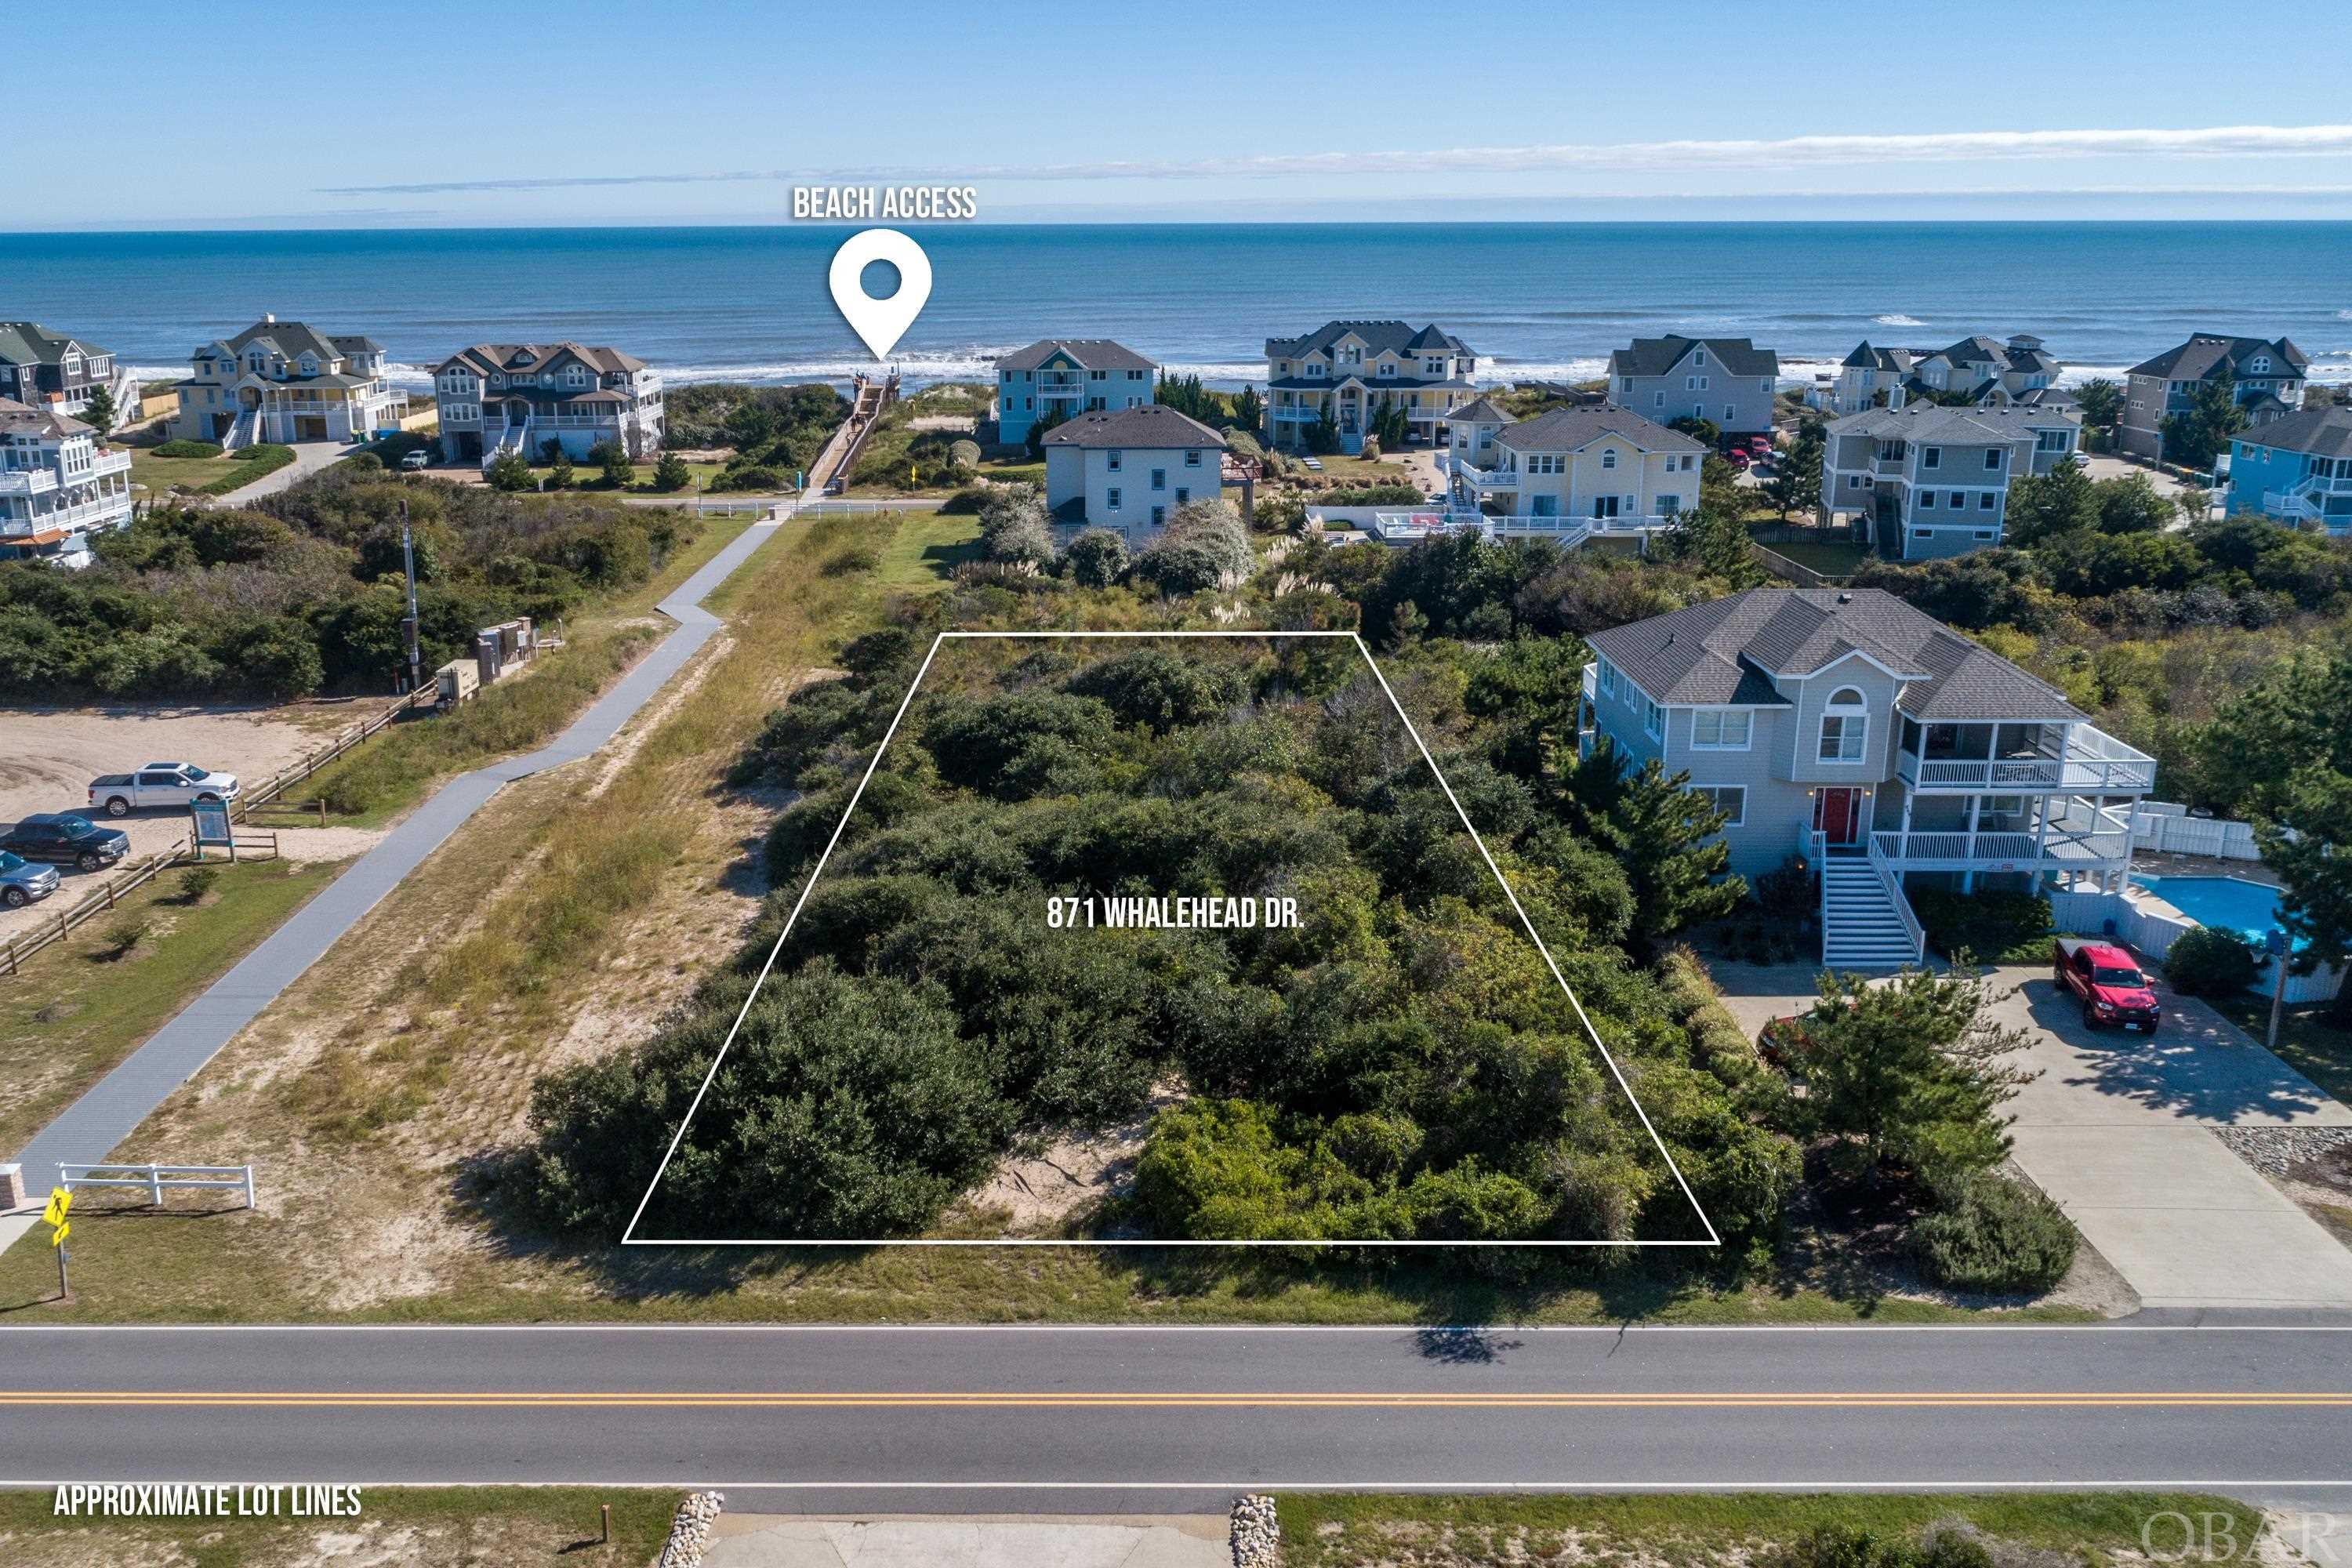 2 Lots from OCEANFRONT large 1/2 Acre CORNER Lot just Steps to Direct Beach Access! This is the perfect lot that you have been waiting for to build your dream beach home. Beach Access from this Whalehead CORNER lot is closer than some Semi Oceanfront lots and considerably less expensive. The lot has potential for Ocean Views, as well as the potential to build a 10 + bedroom home. There are not many 2 lot OceanFront lots left in the much sought after Whalehead Club Subdivision, let alone a CORNER lot. Here is an opportunity to build your primary home or second home or investment home. If highest and best use of this property is maximized, the income potential is great.  Restaurants, Shopping, Grocery Stores, and Activities, including Currituck Club Golf Course, Historic Whalehead Club, Wildlife Center, Currituck Beach Lighthouse, and the Wild Horses are close by.  If you are looking to build your dream beach home on a CORNER lot that is just 2 lots from the beach with potential ocean views, just steps to direct beach access and located in Flood Zone X, then this is the lot for you!